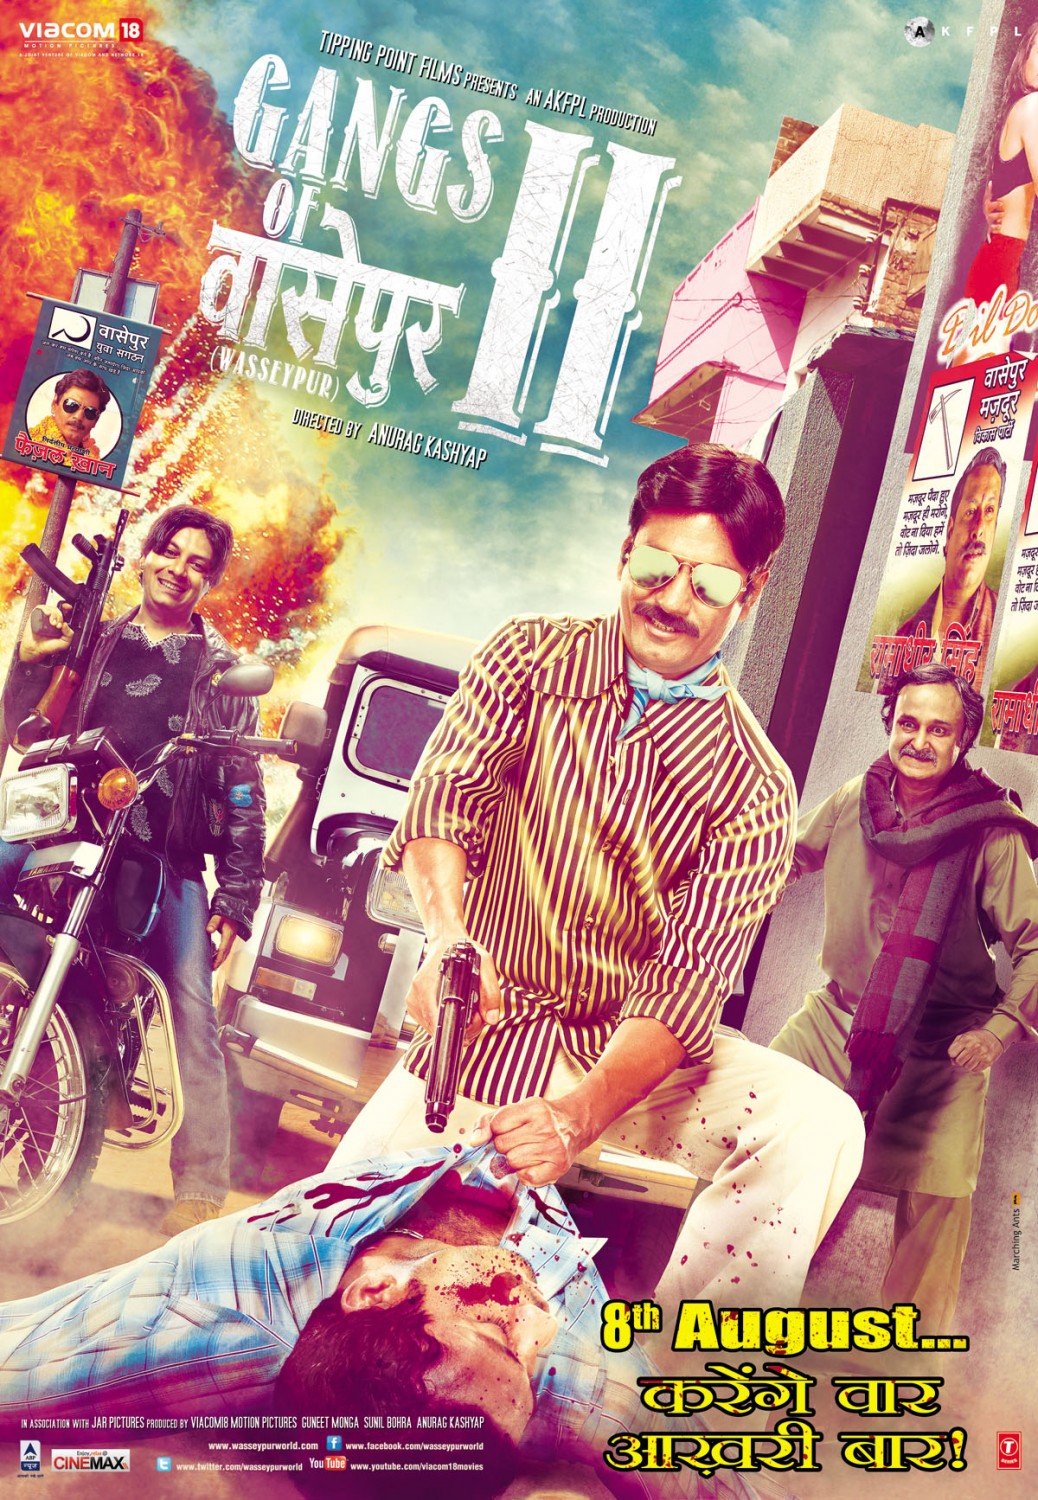 Extra Large Movie Poster Image for Gangs of Wasseypur II (#1 of 4)